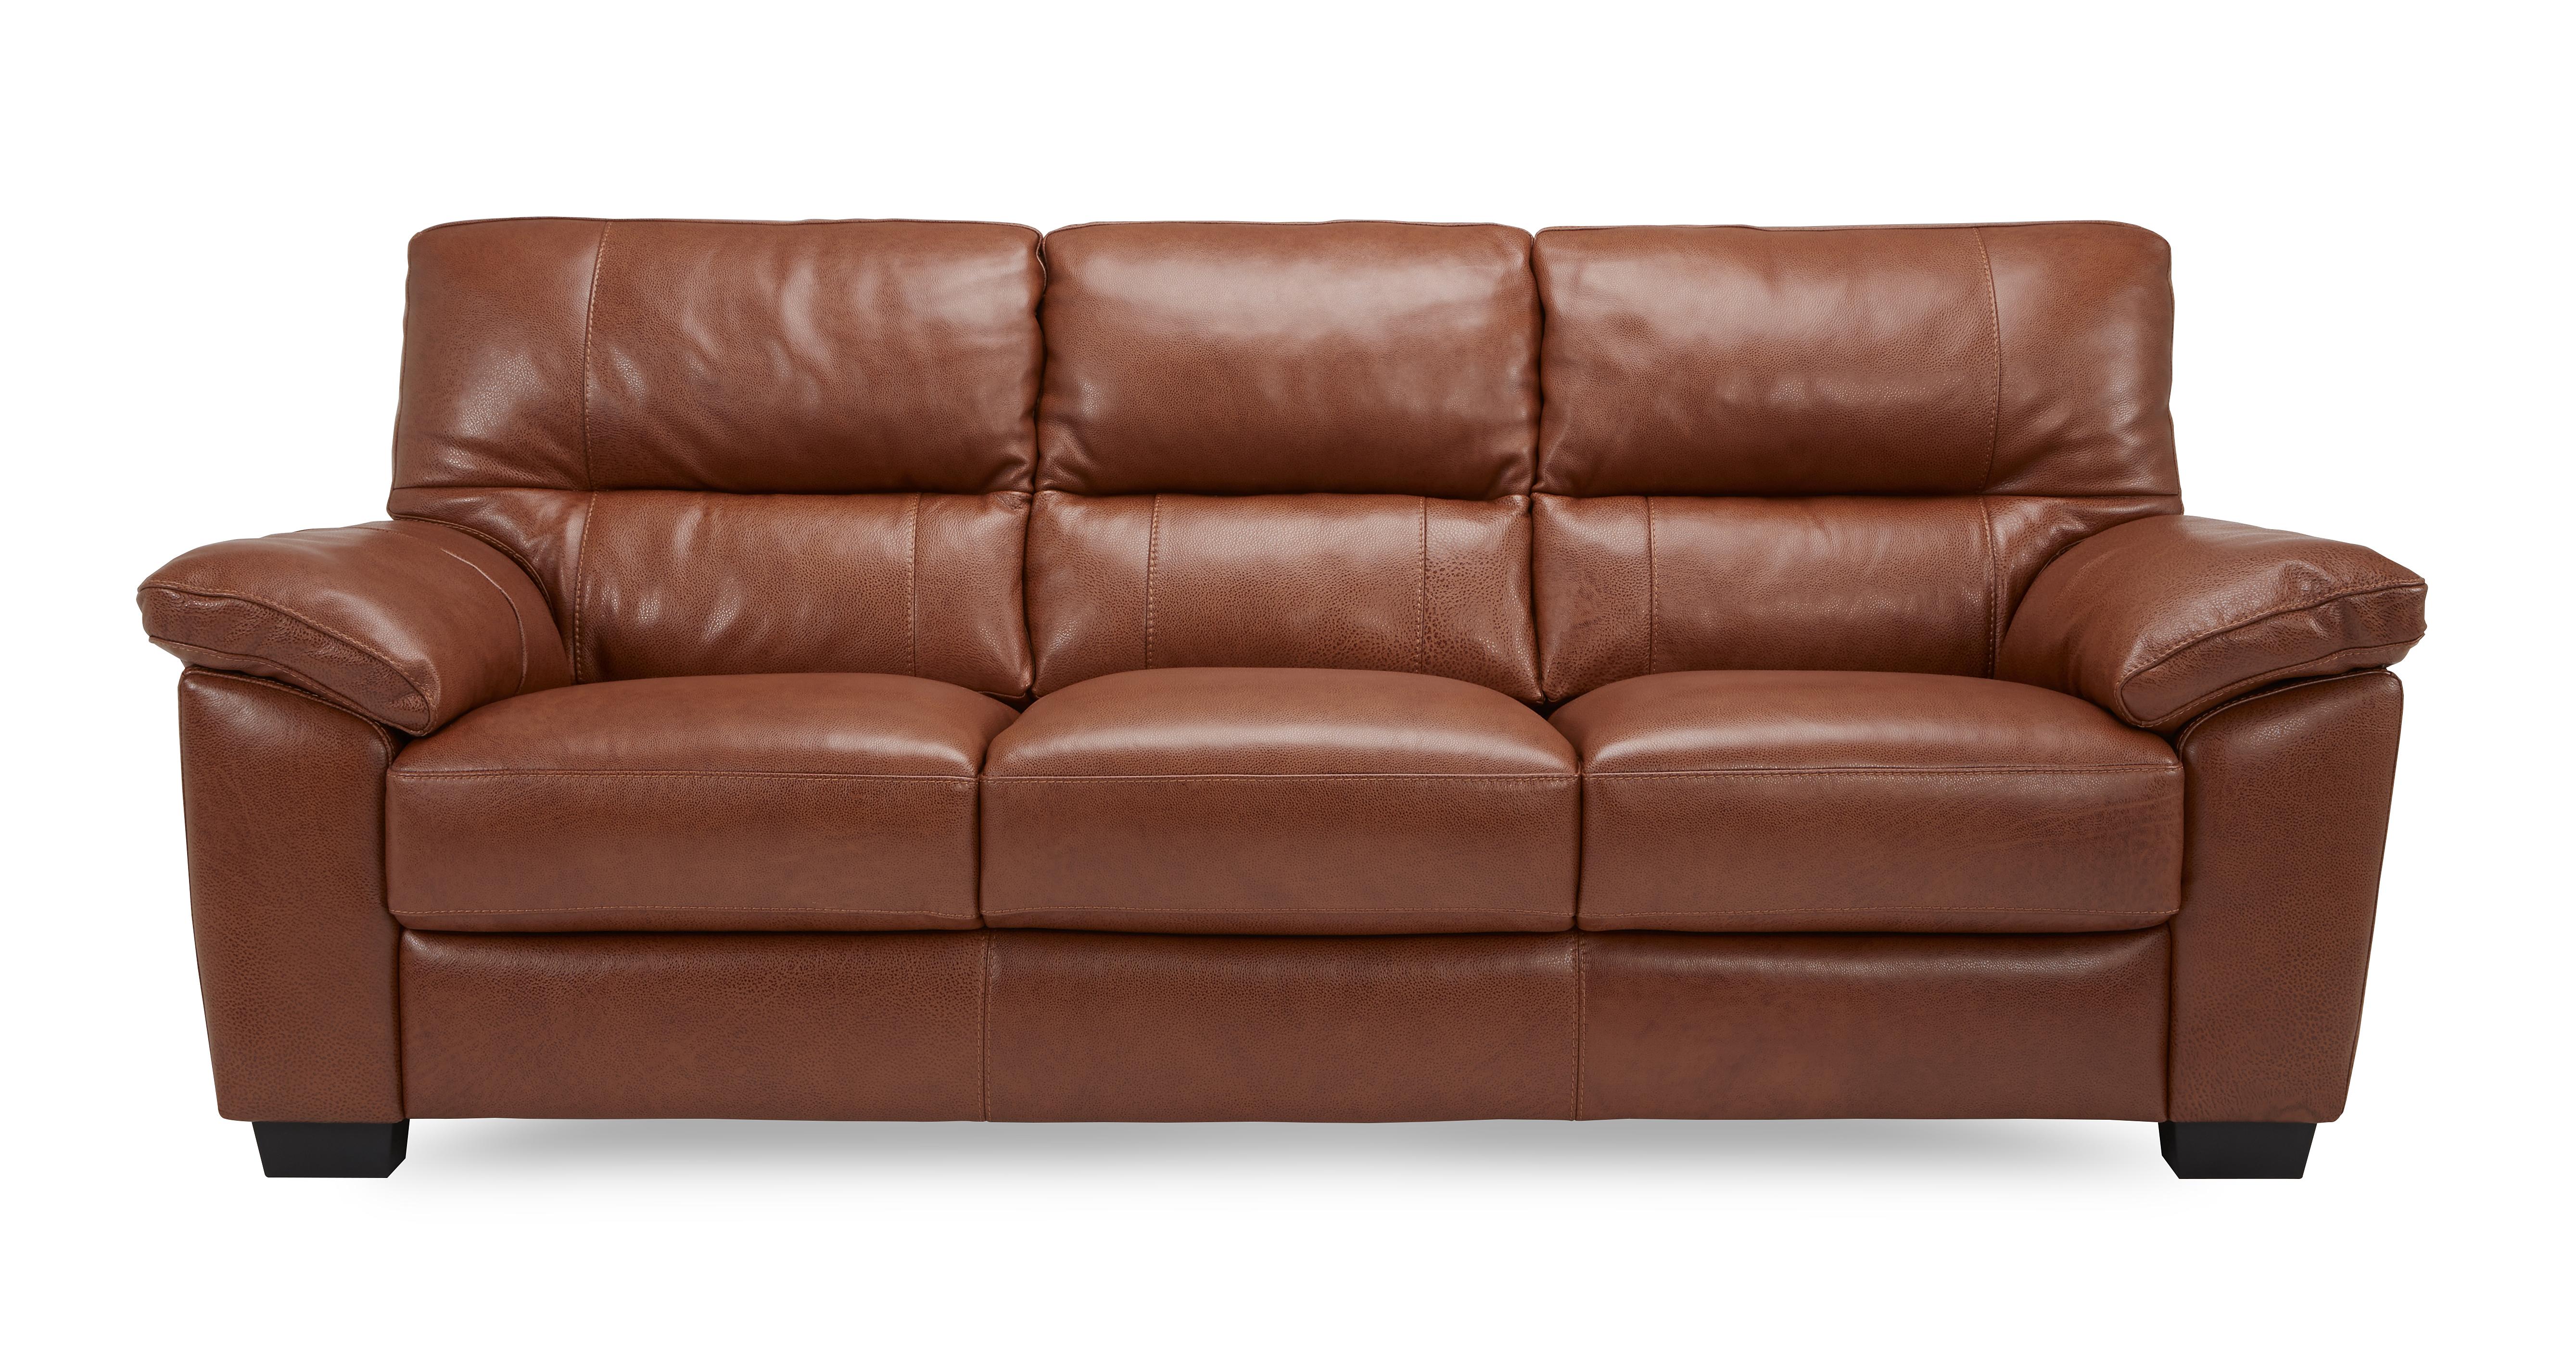 leather look fabric for sofa